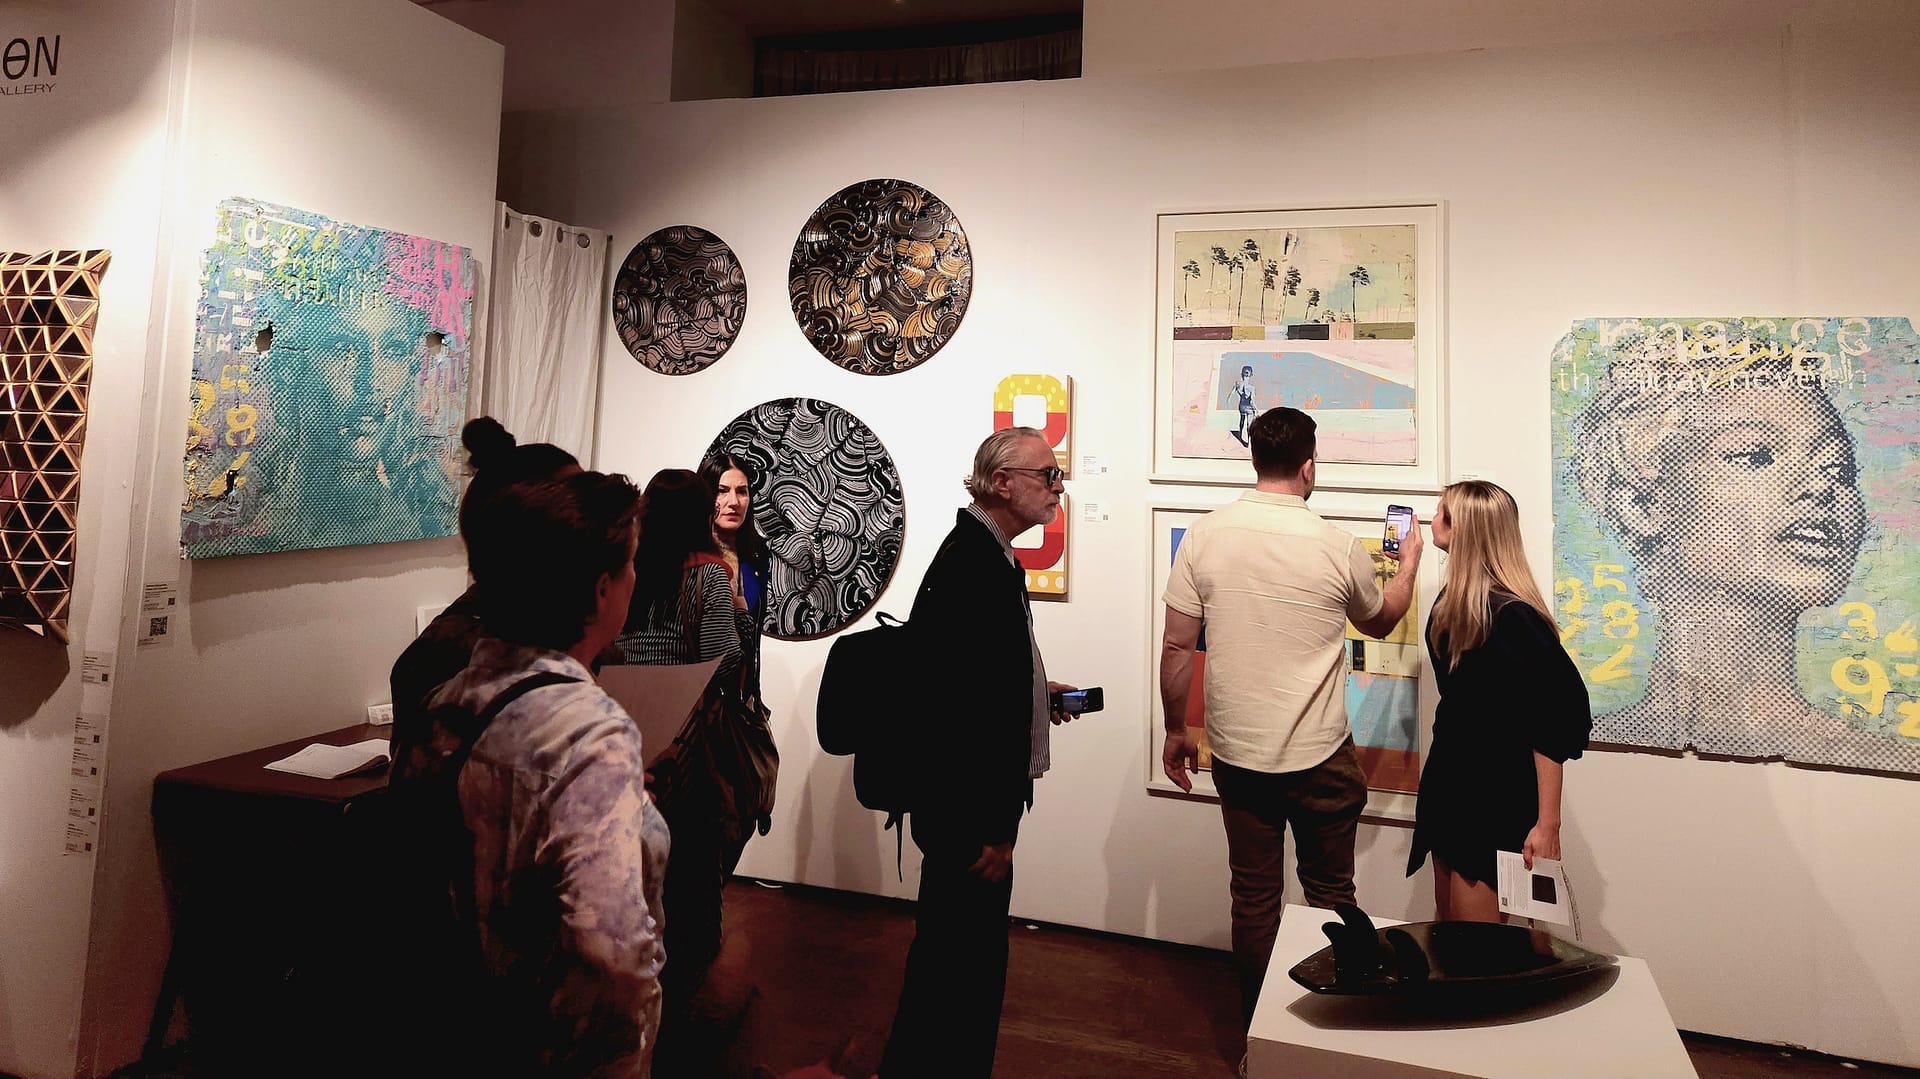 How to Spend $1,000 at NYC’s Affordable Art Fair